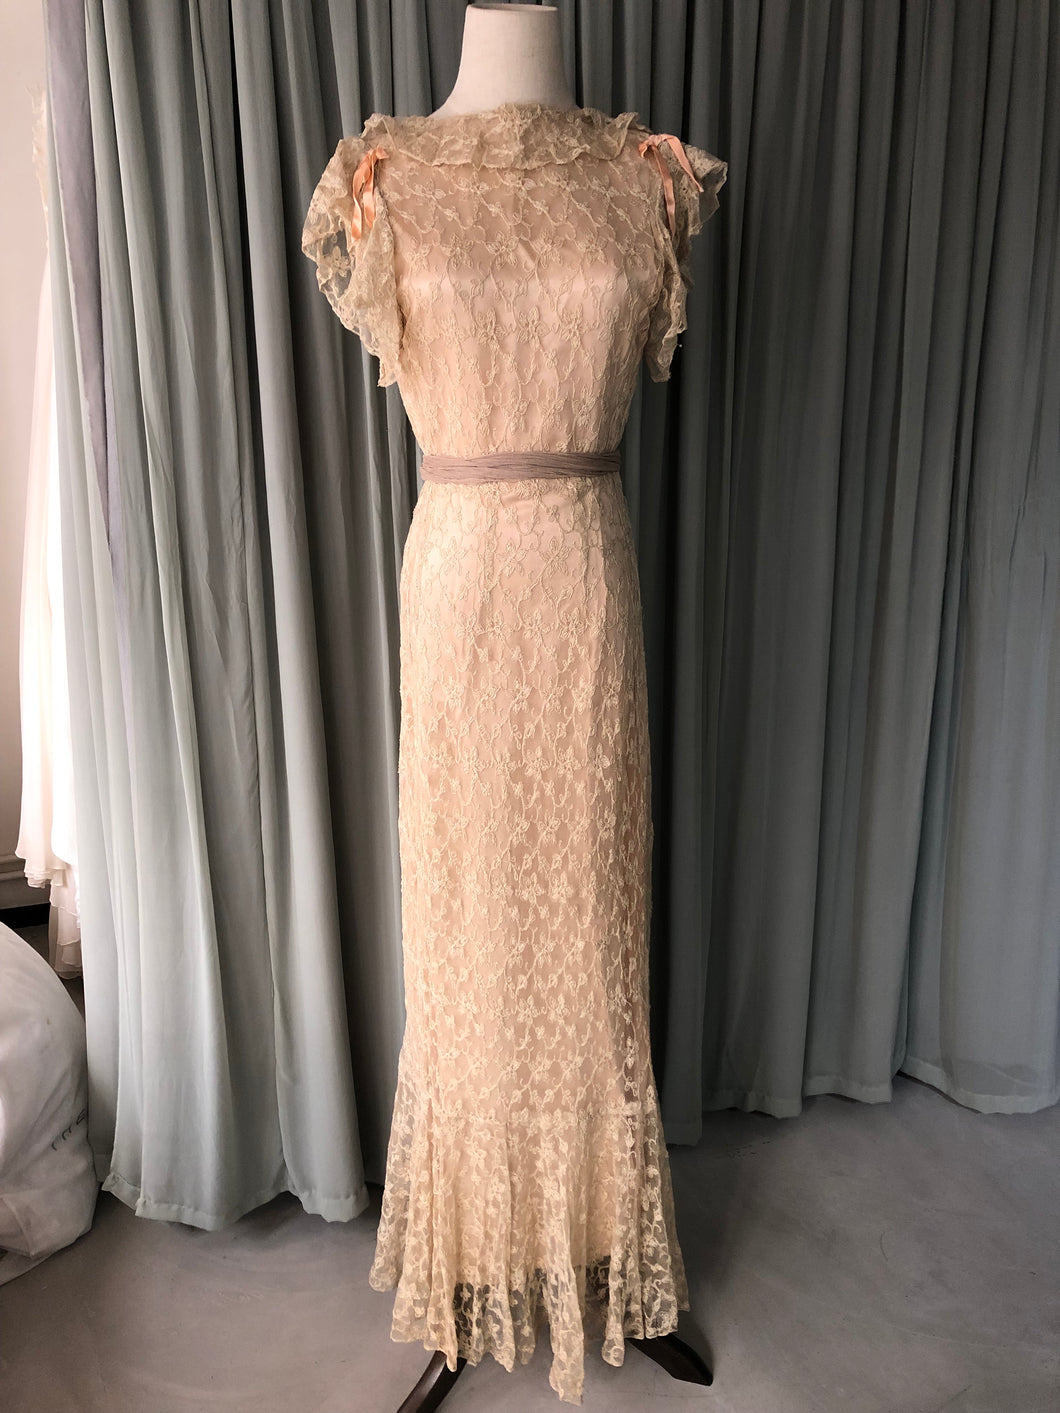 1940s Needle lace gown with pink lining